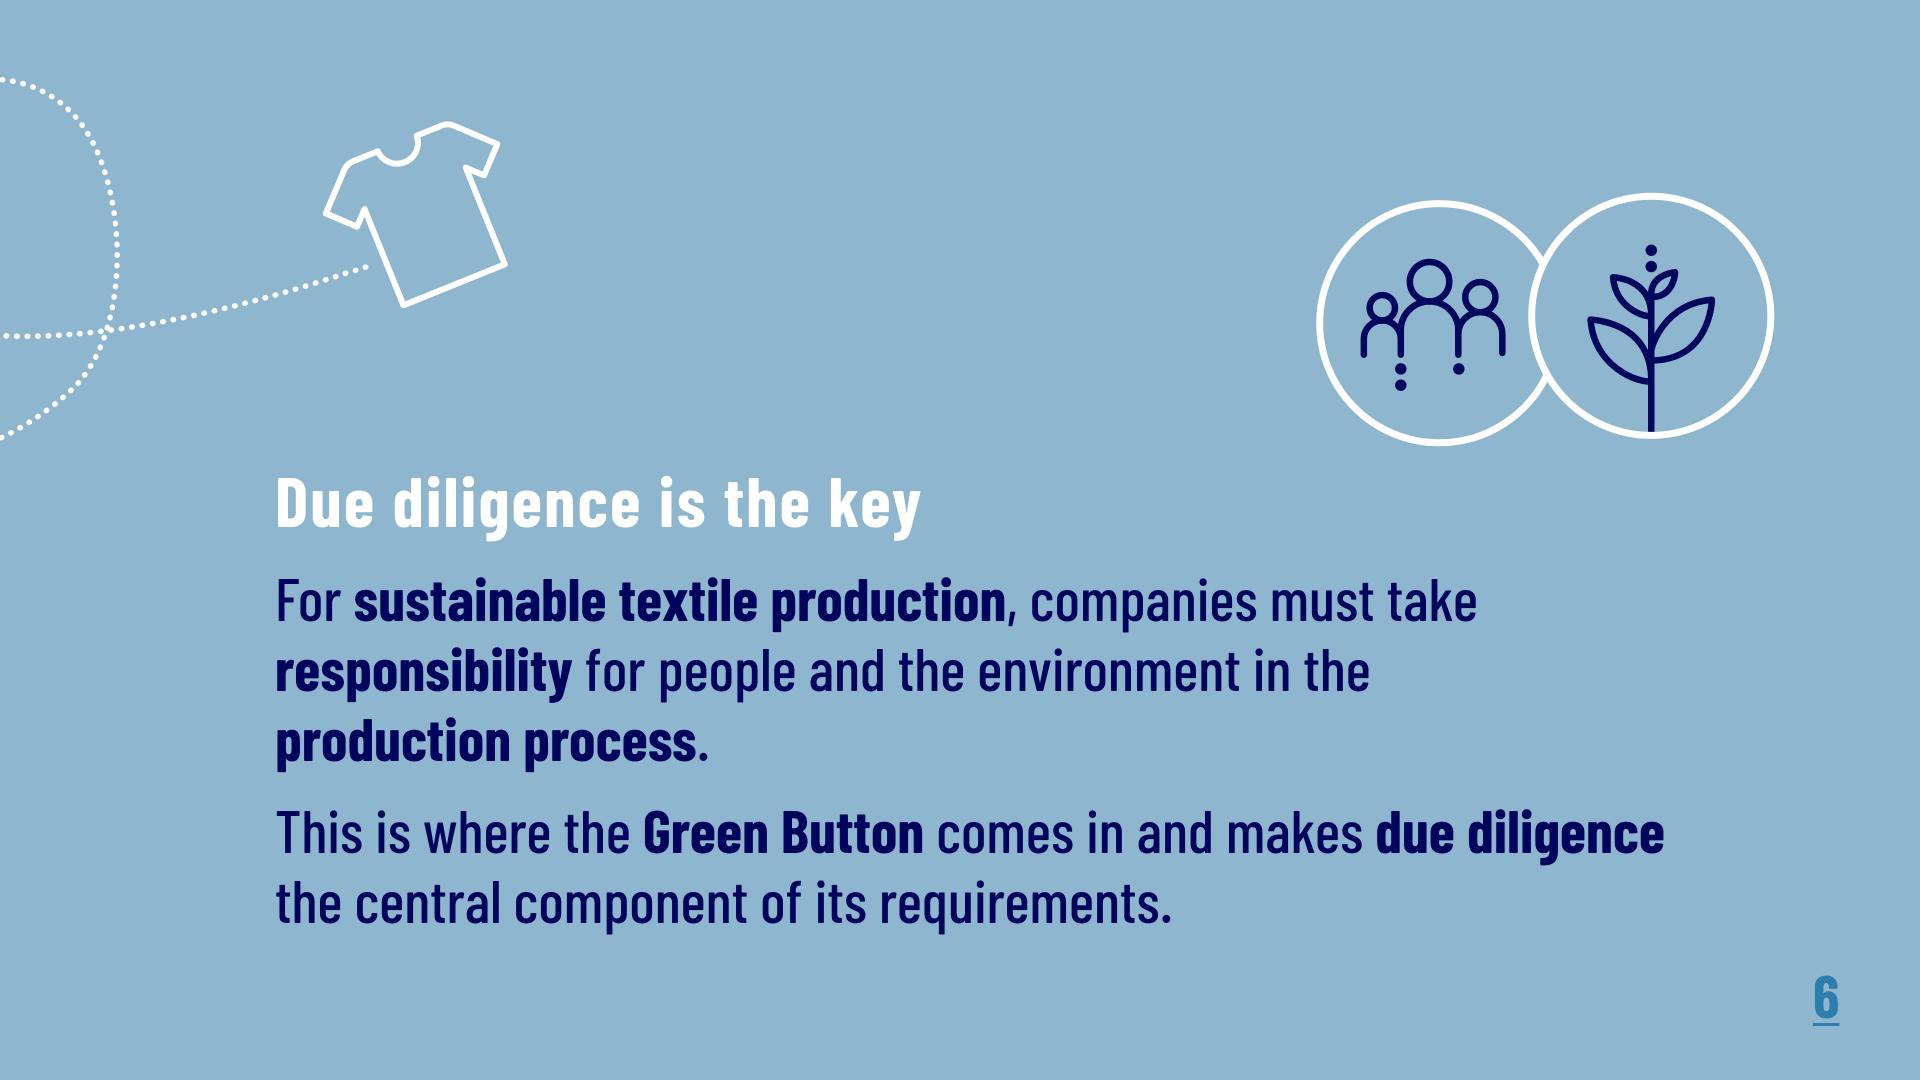 Due Diligence is the key: For sustainable textile production, companies must take responsibility for people and the environment in the production process. This is where the Green Button comes in and makes due diligence the central component of its requirements. 